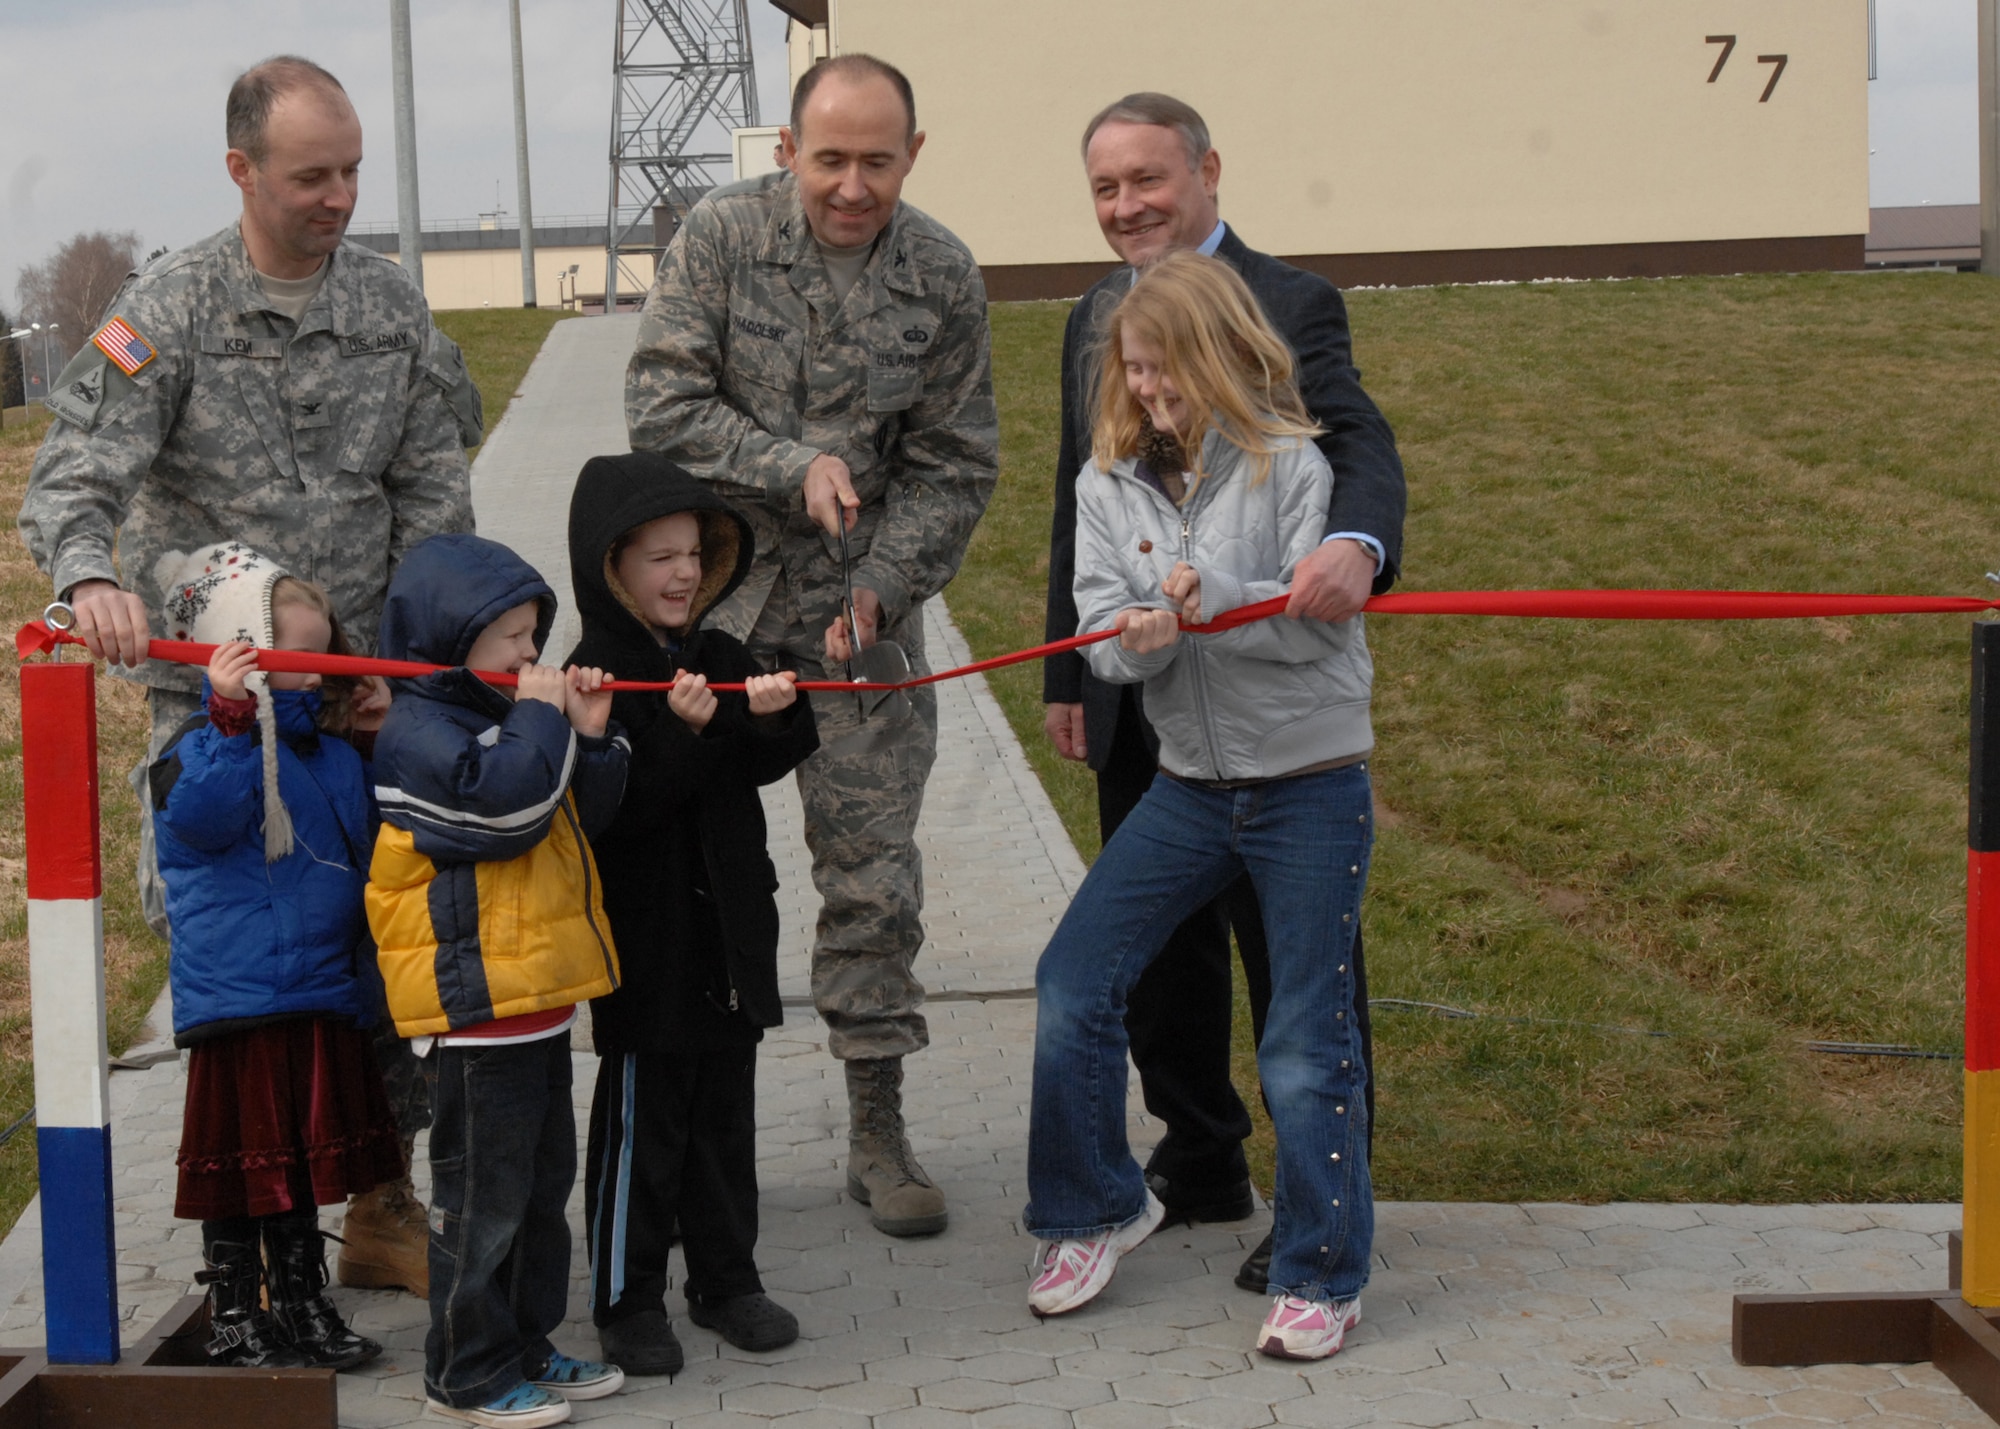 SPANGDAHLEM AIR BASE, Germany -- Col. William Nadolski, 52nd Fighter Wing vice commander, along with members of the Army Corps of Engineers and children of wing leadership cut a ribbon during the for the new air traffic control tower March 13, 2009.  After the ceremony visitors were given a chance to look at the new tower which provides air traffic controllers a view of the entire flight line. (U.S. Air Force photo by Senior Airman Jenifer H. Calhoun)